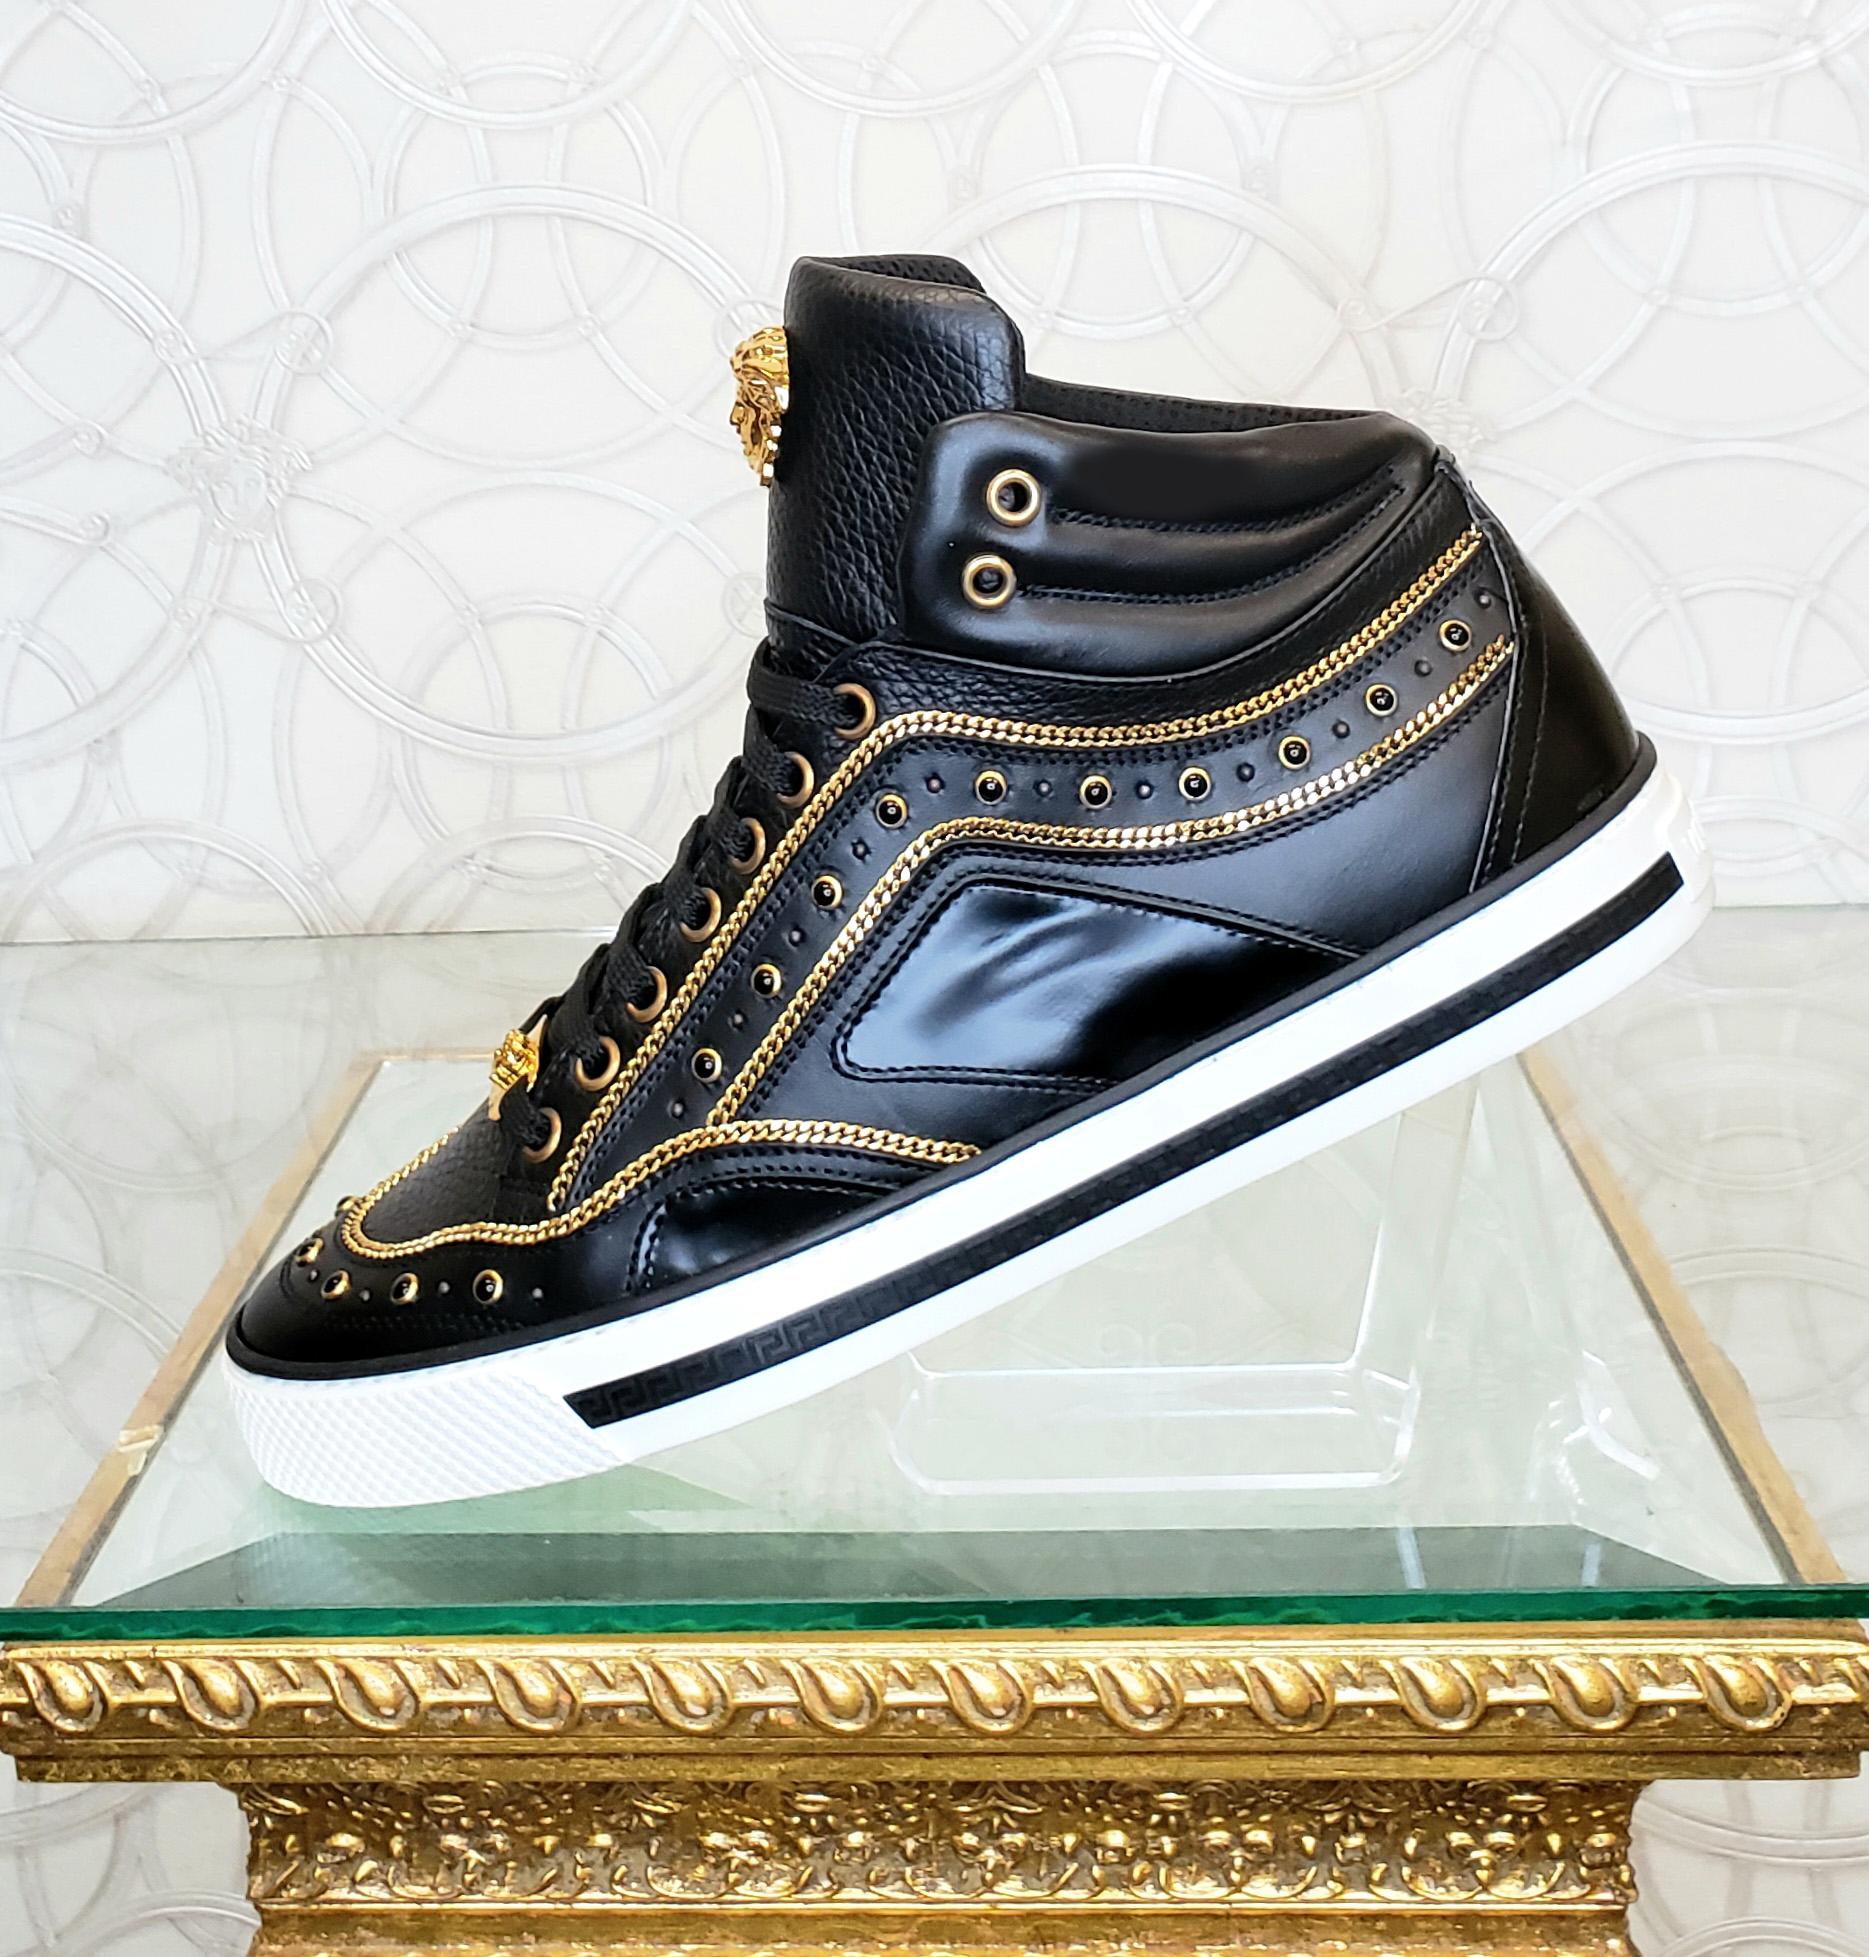 NEW VERSACE STUDDED HIGH-TOP SNEAKERS with GOLD 3D MEDUSA BUCKLE SIZE 43 - 10 4